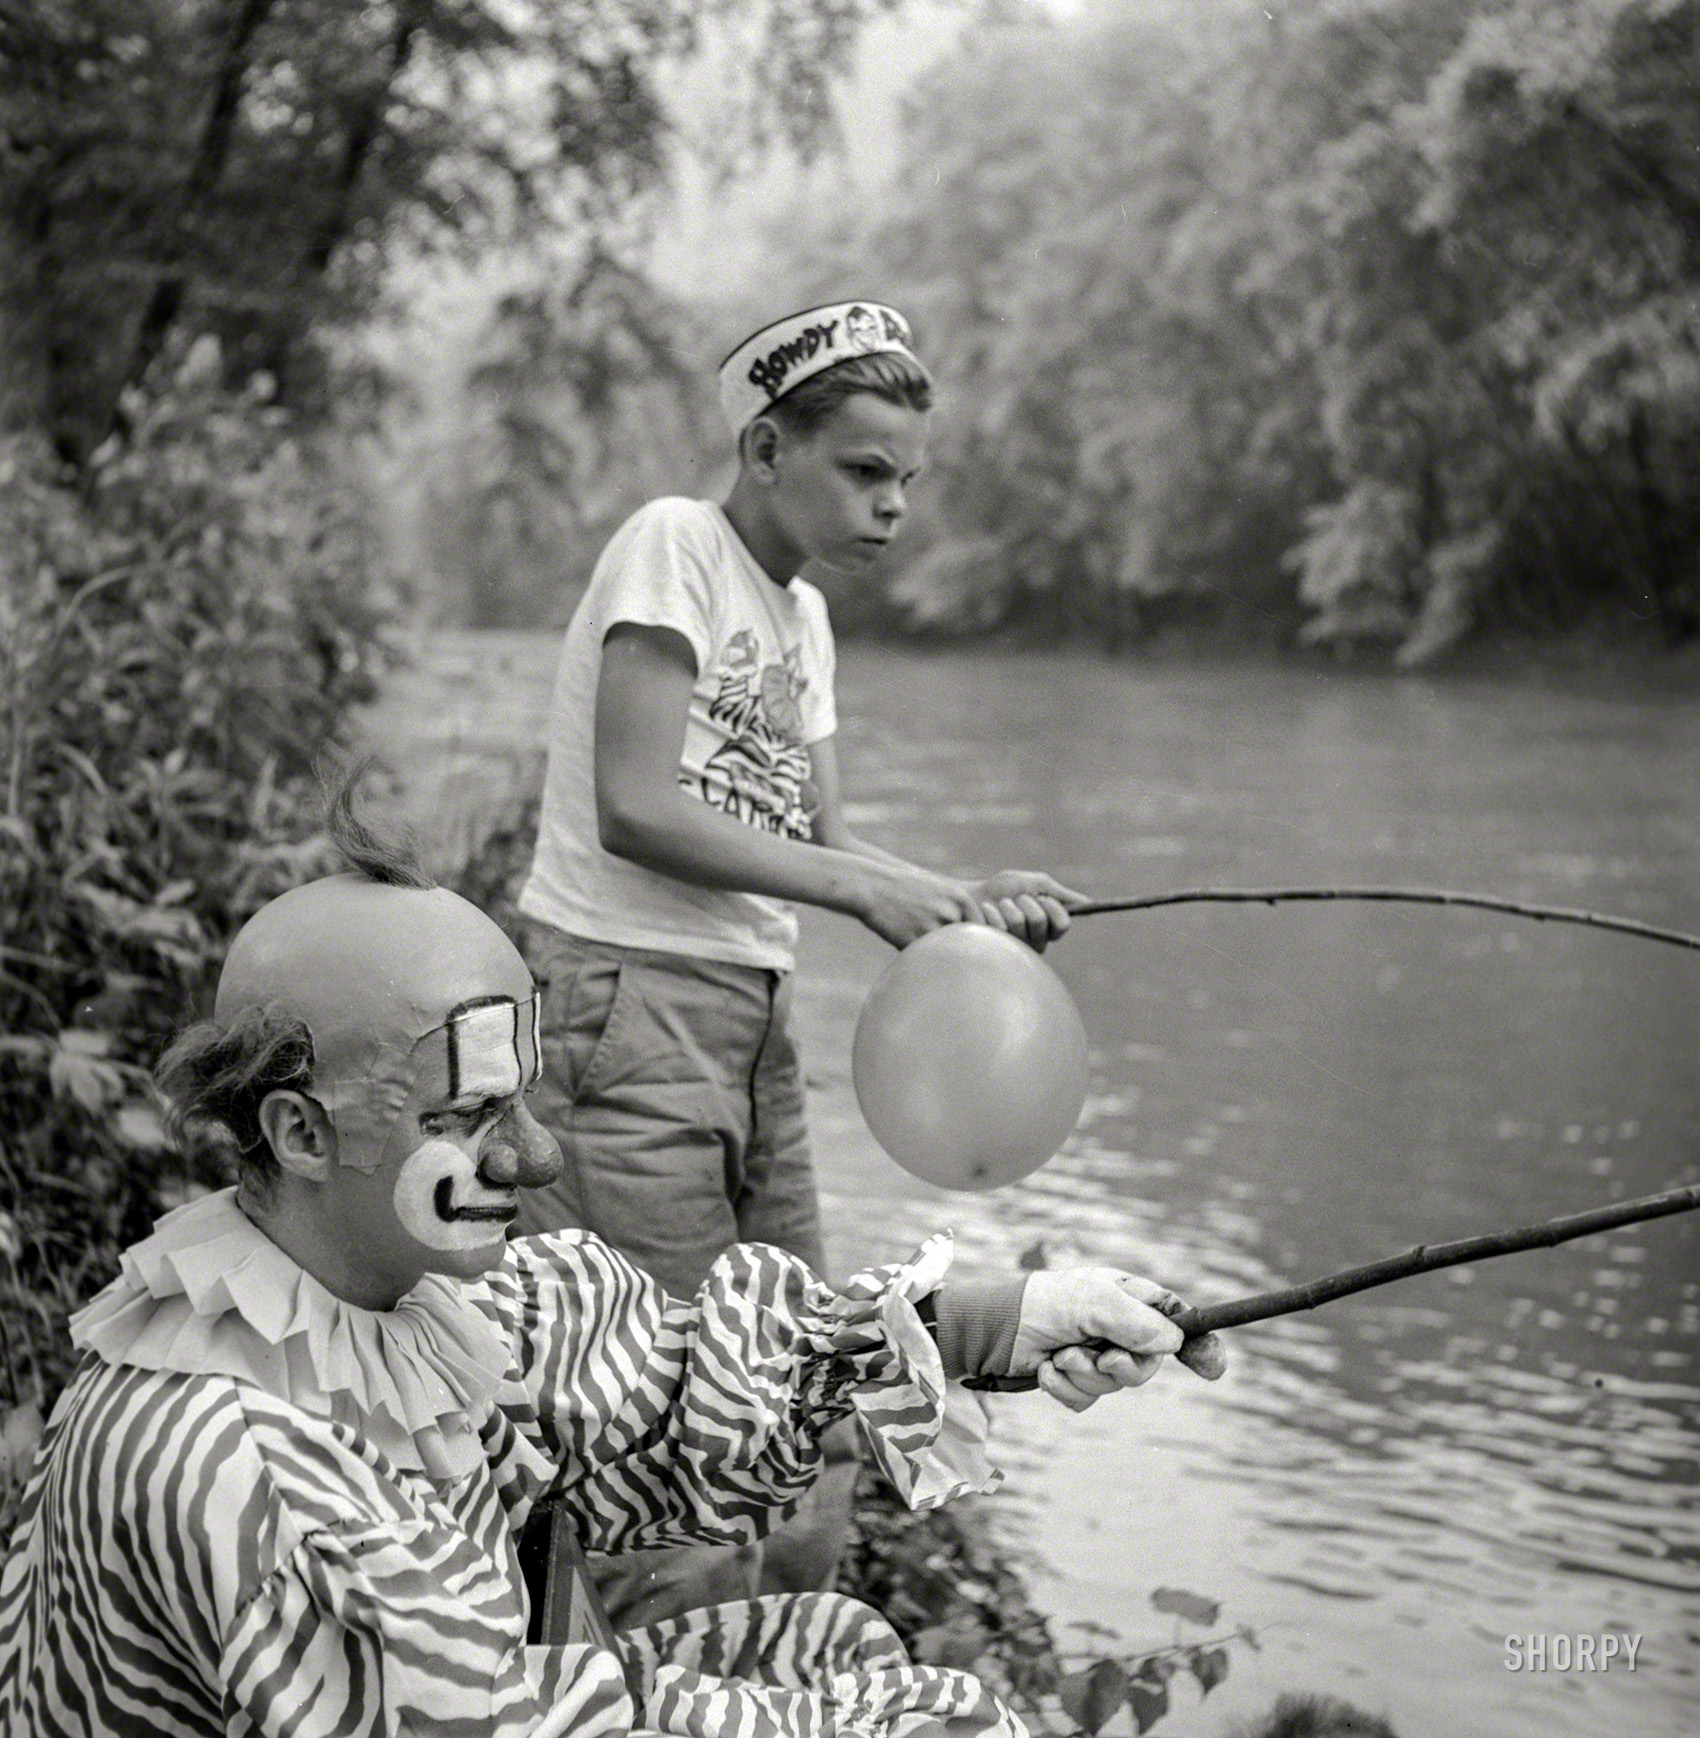 June 1953. "Howdy Doody Show's Clarabell the Clown (actor Nick Nicholson) pays a one-week visit to the Dolan family in Boone County, West Virginia, after Linda Dolan, daughter of coal mine foreman, was the winner of the 'I'd Like Clarabell to Visit Me Because' contest." From photos by Phillip Harrington for the Look magazine assignment "Clarabell Takes to the Hills." View full size.